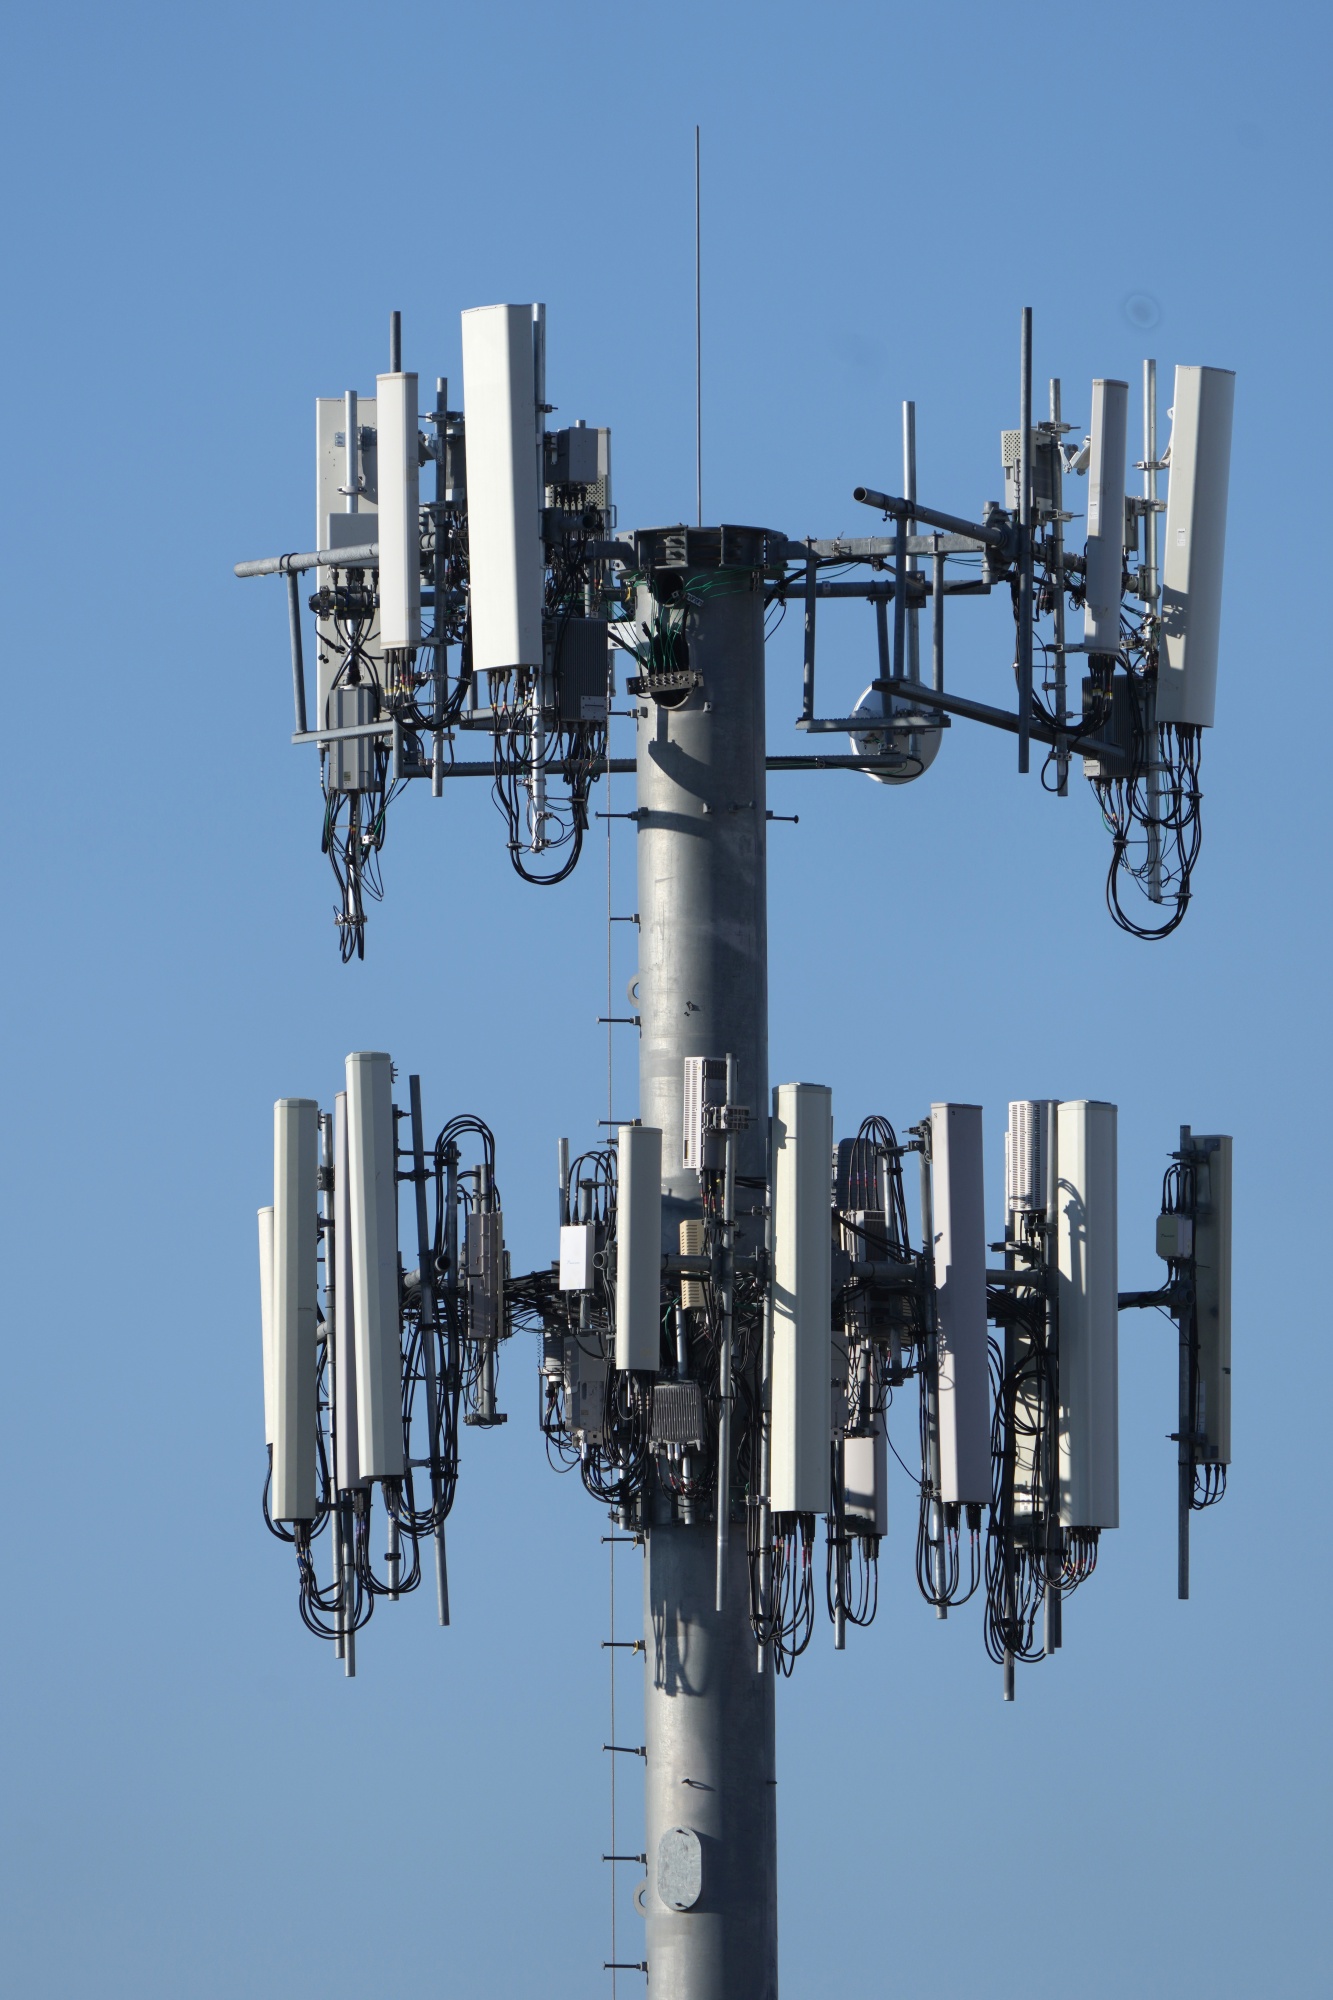 A 5G cell tower in Orem, Utah, U.S., on Tuesday, Jan. 11, 2022. 